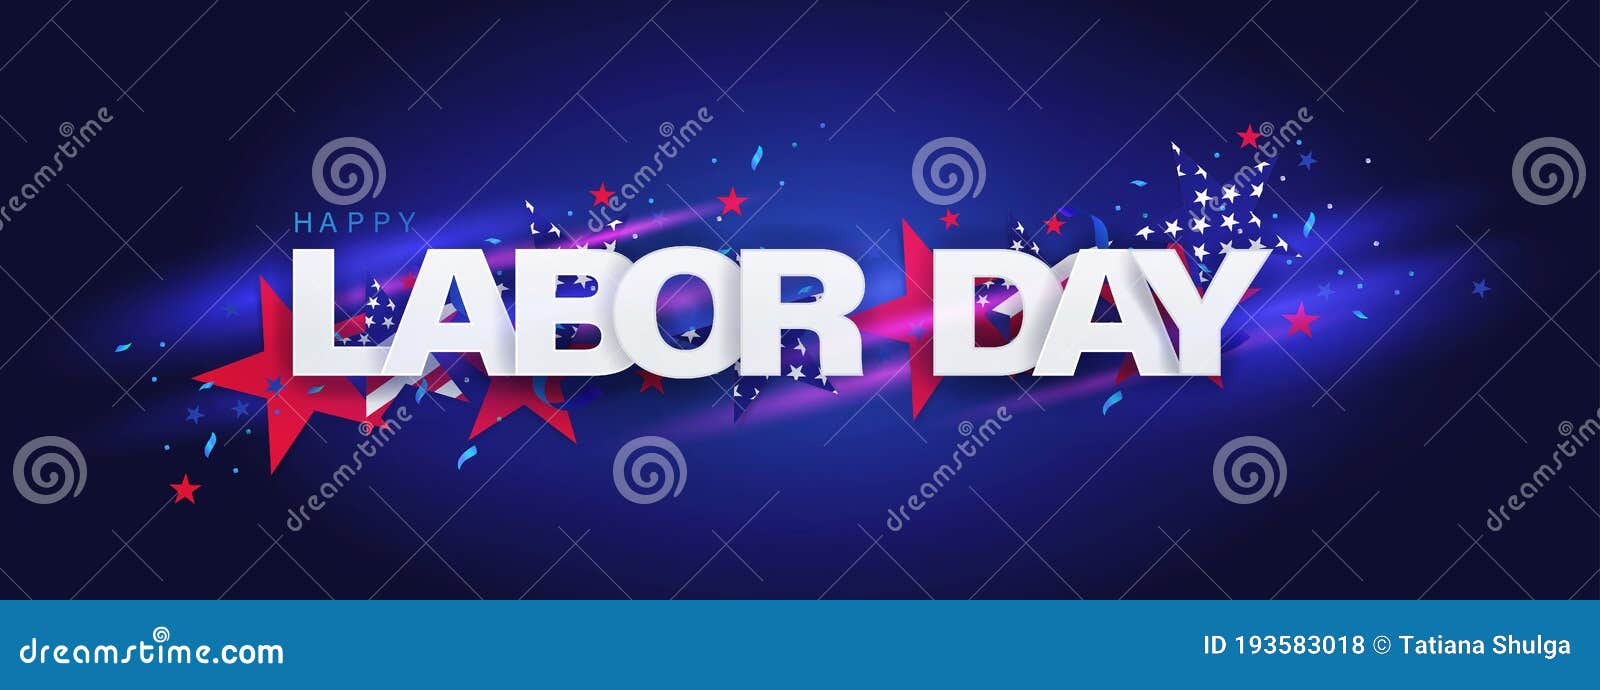 Happy Labor Day Long Horizontal Banner. USA Festive Design in National